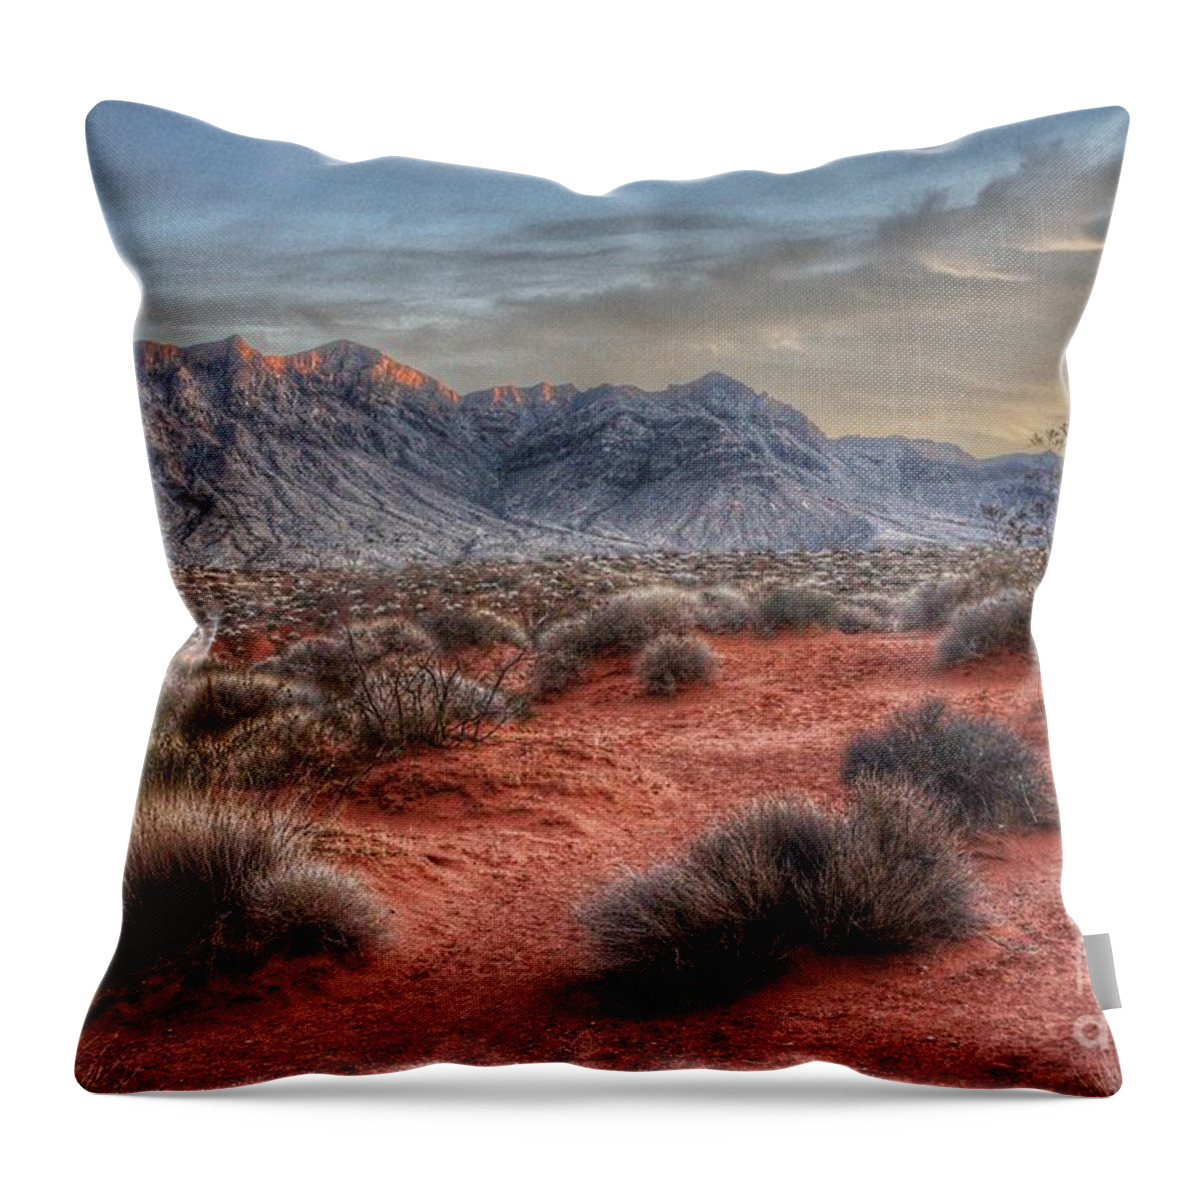  Throw Pillow featuring the photograph The Days Finale by Rodney Lee Williams